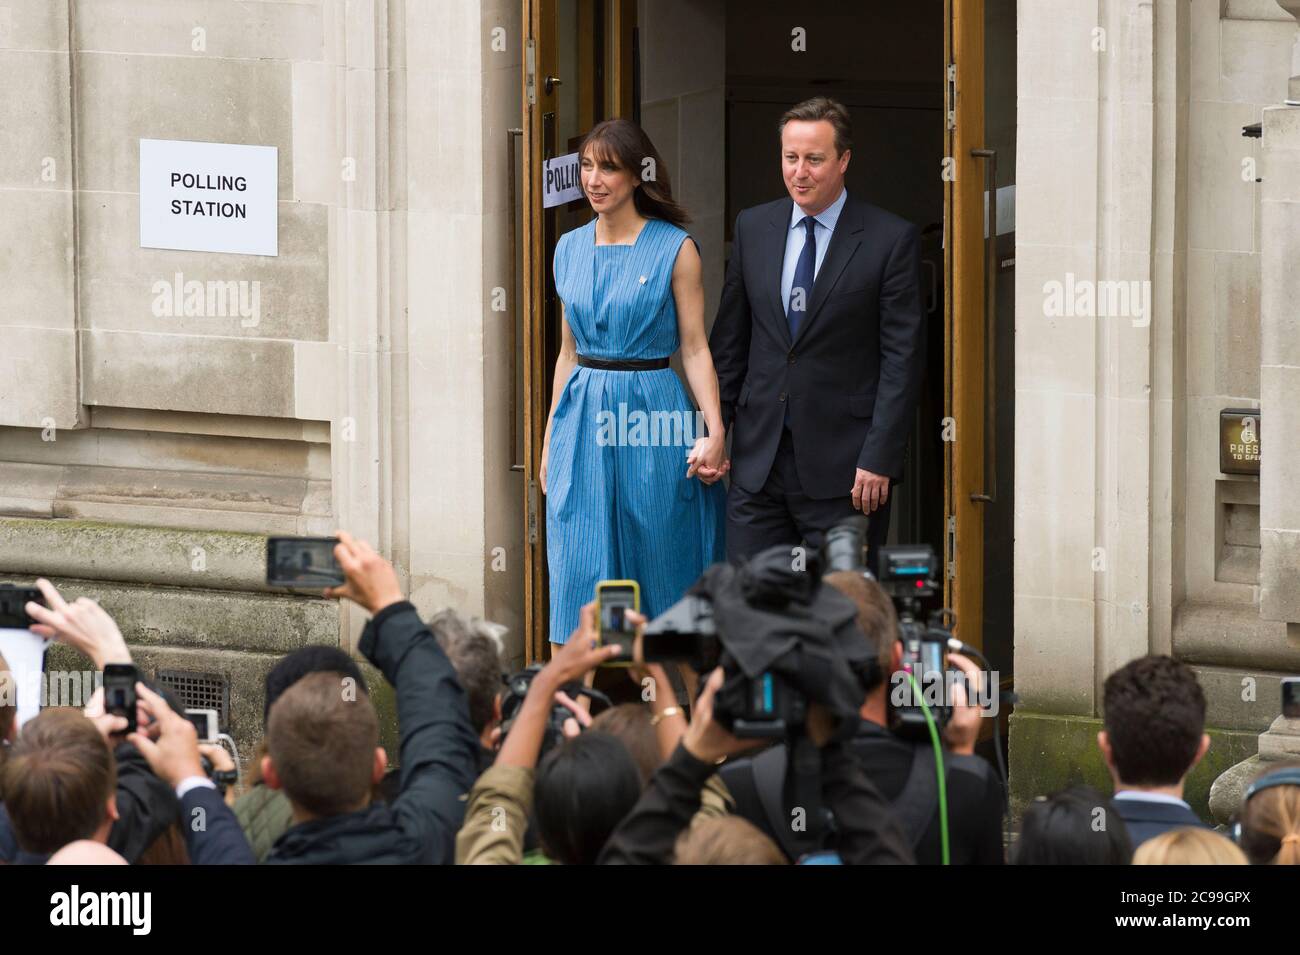 British Prime Minister David Cameron leaving with his wife Samantha after voting in the British referendum on whether to remain part of European Union or leave, Methodist Central Hall Westminster, London, UK.  23 Jun 2016 Stock Photo